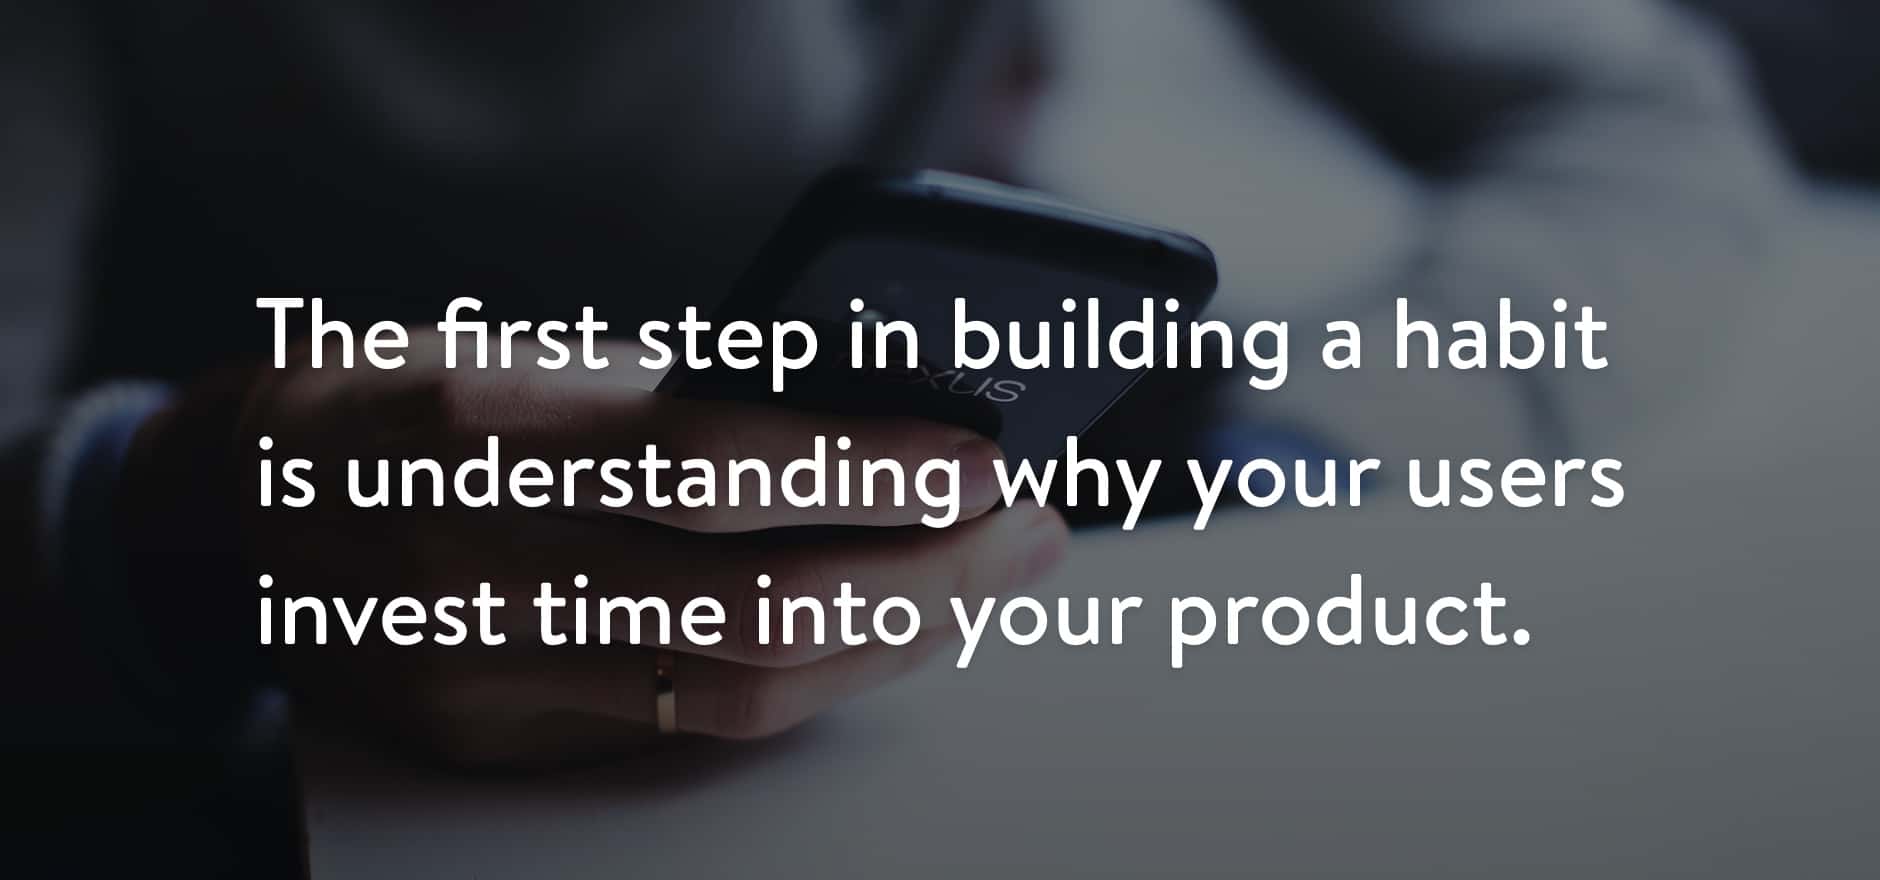 The first step in building a habit is understanding why your users invest time into your product.